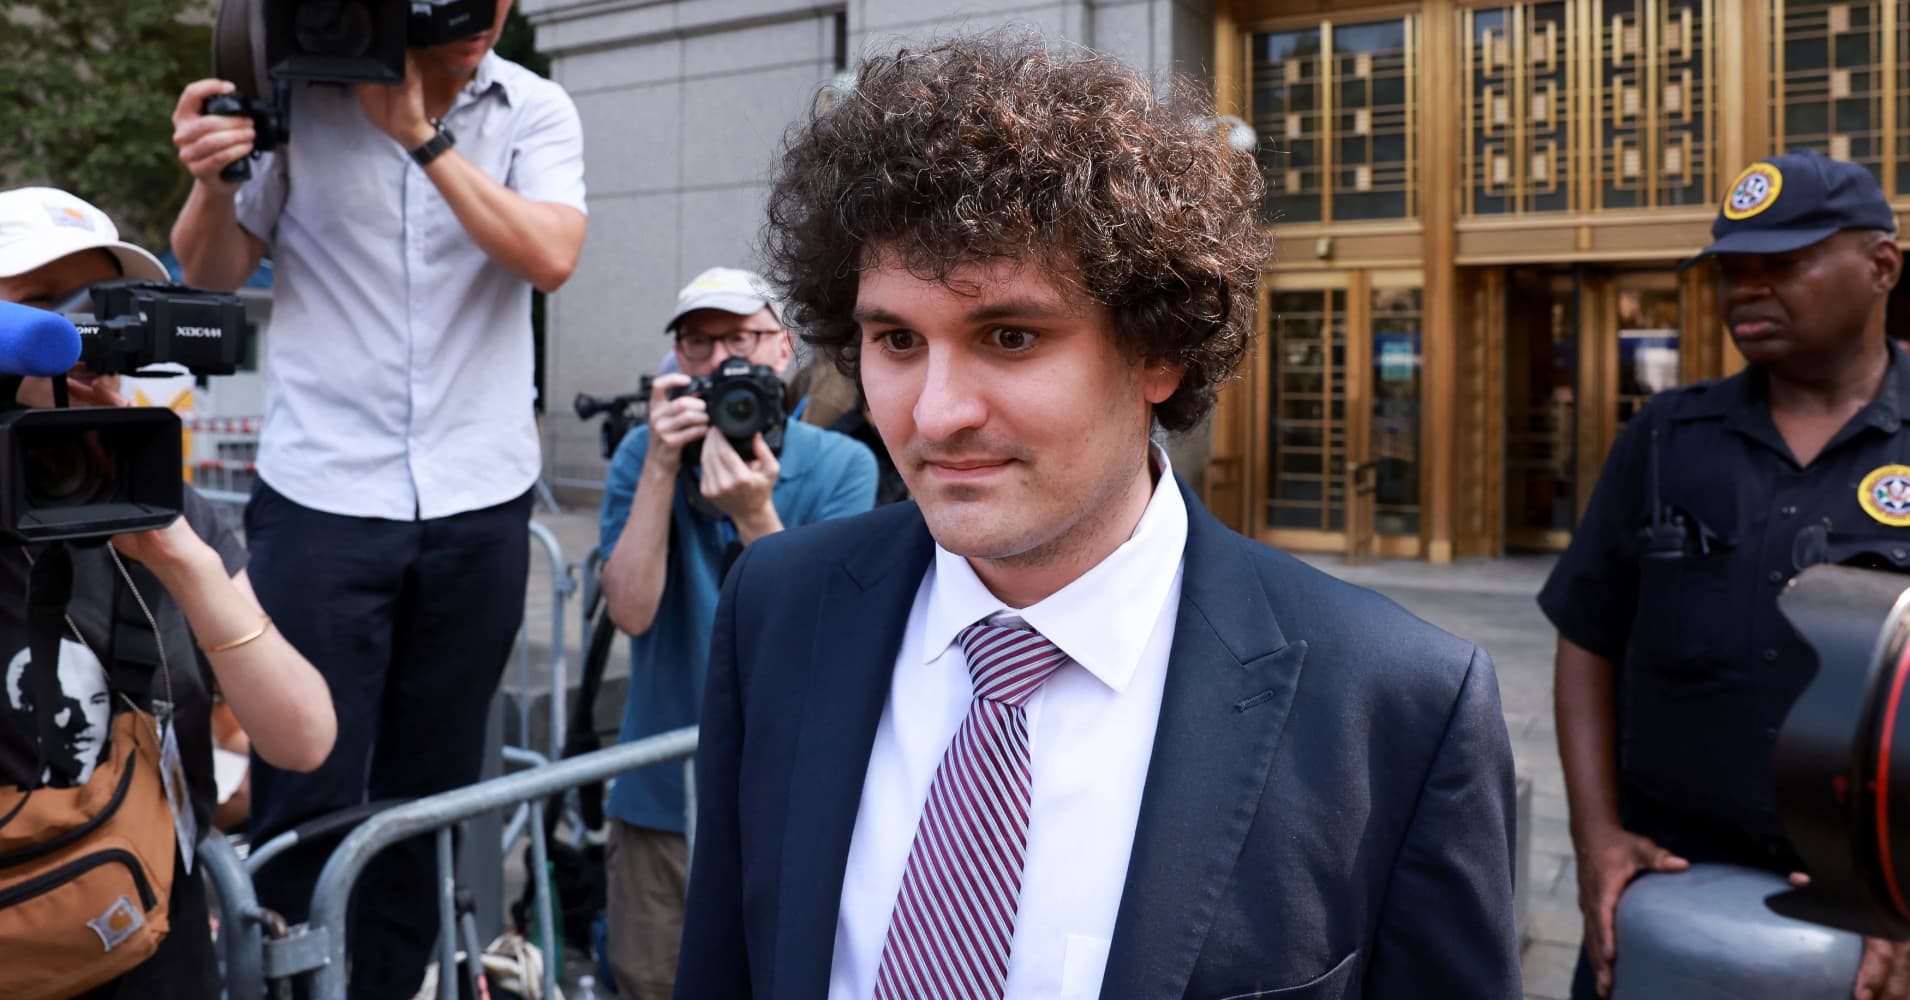 ftx founder sam bankman-fried sentenced to 25 years for crypto fraud